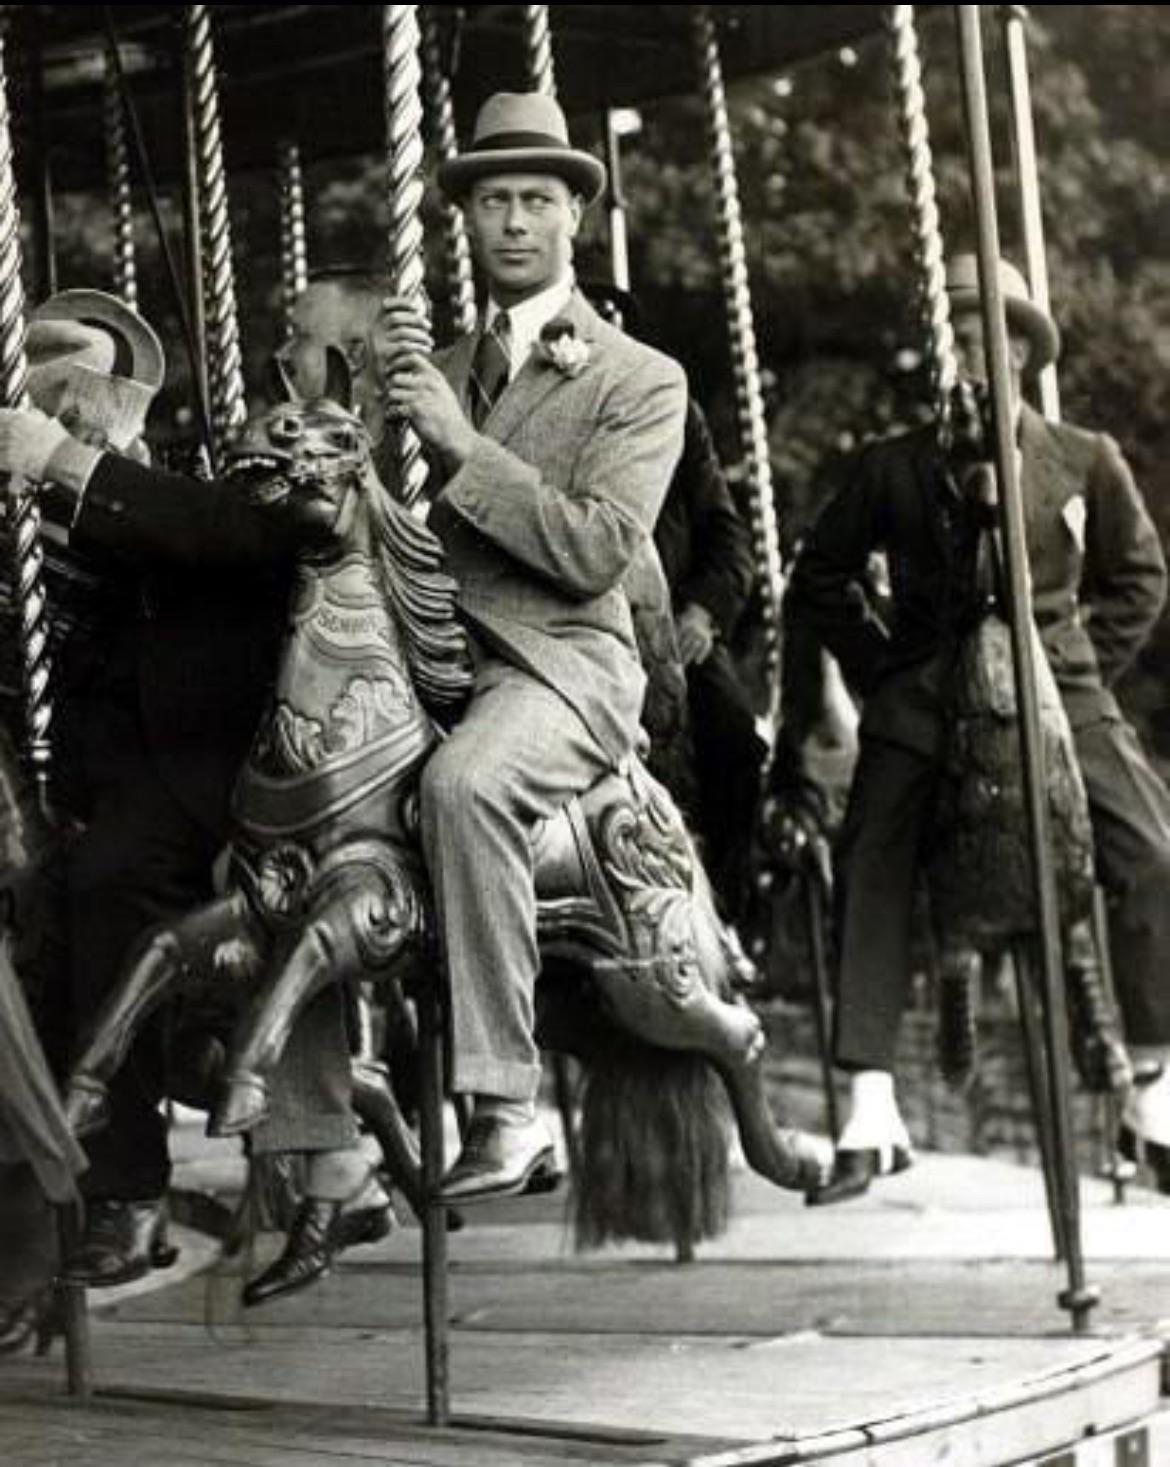 King George VI riding a merry-go-round at the Great Bookham fete - Surrey, England - June 1922.jpeg